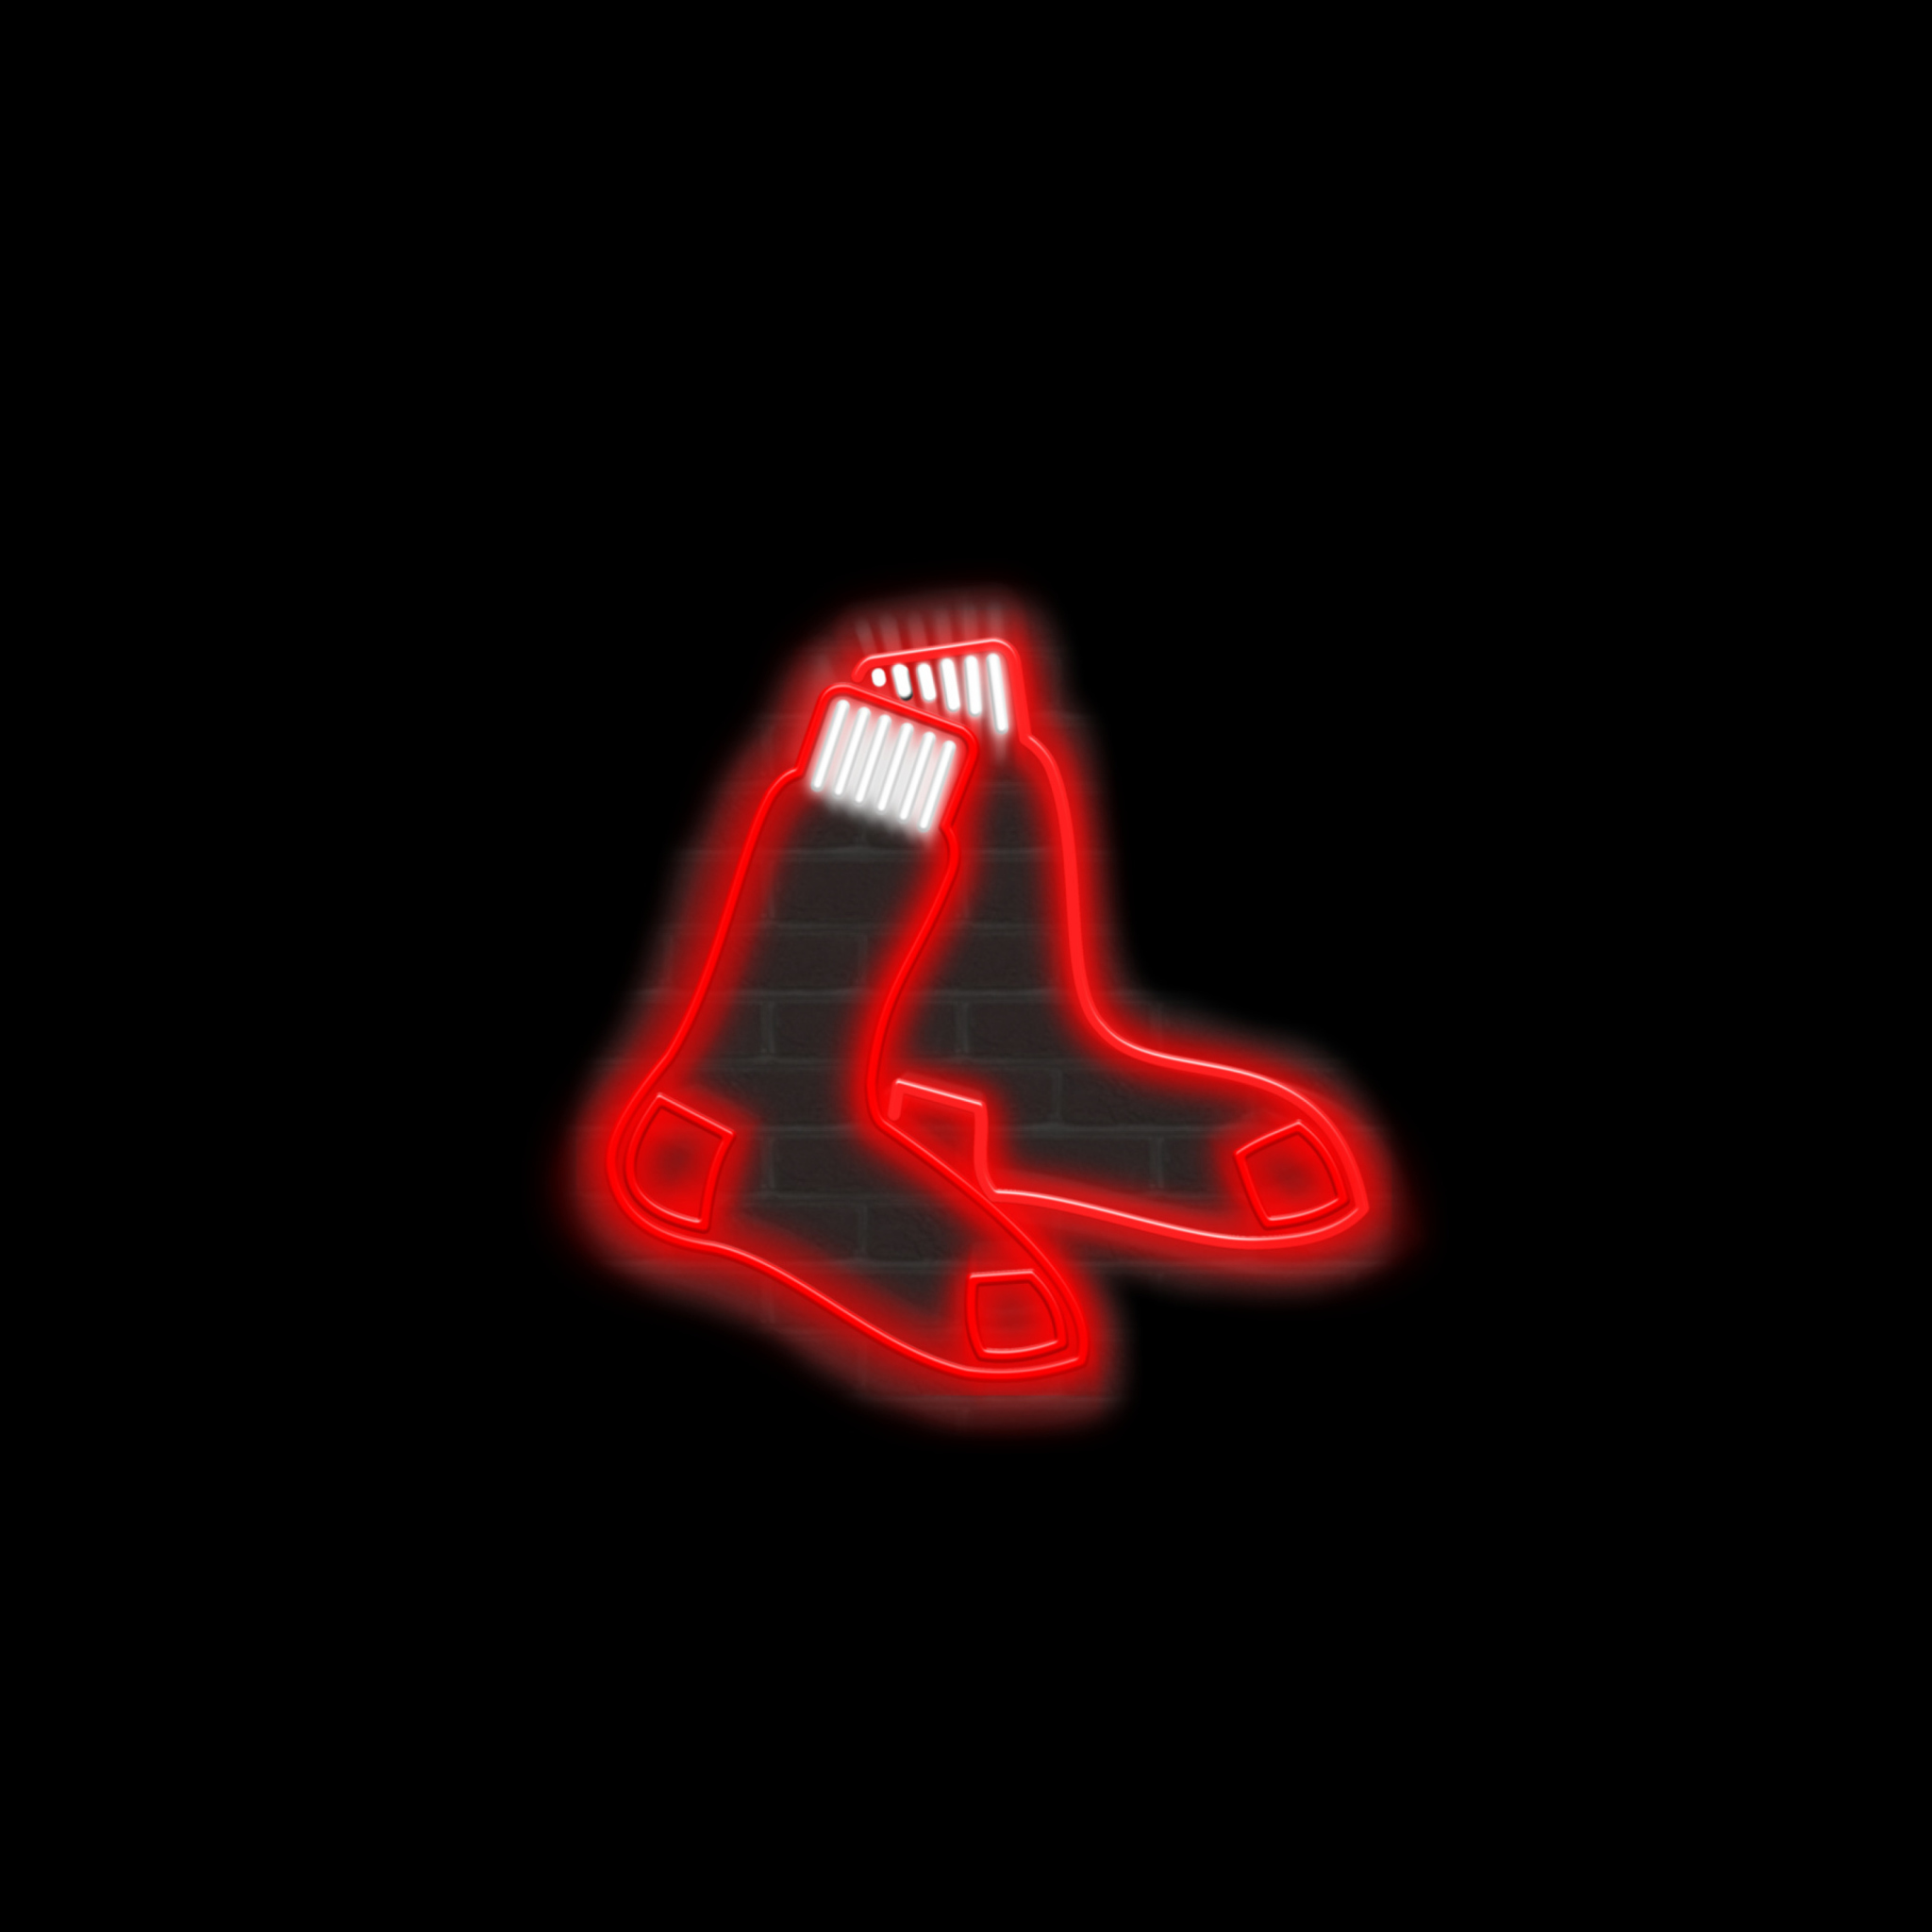 Red Sox HDq Image Mrl17 High Quality Wallpaper For